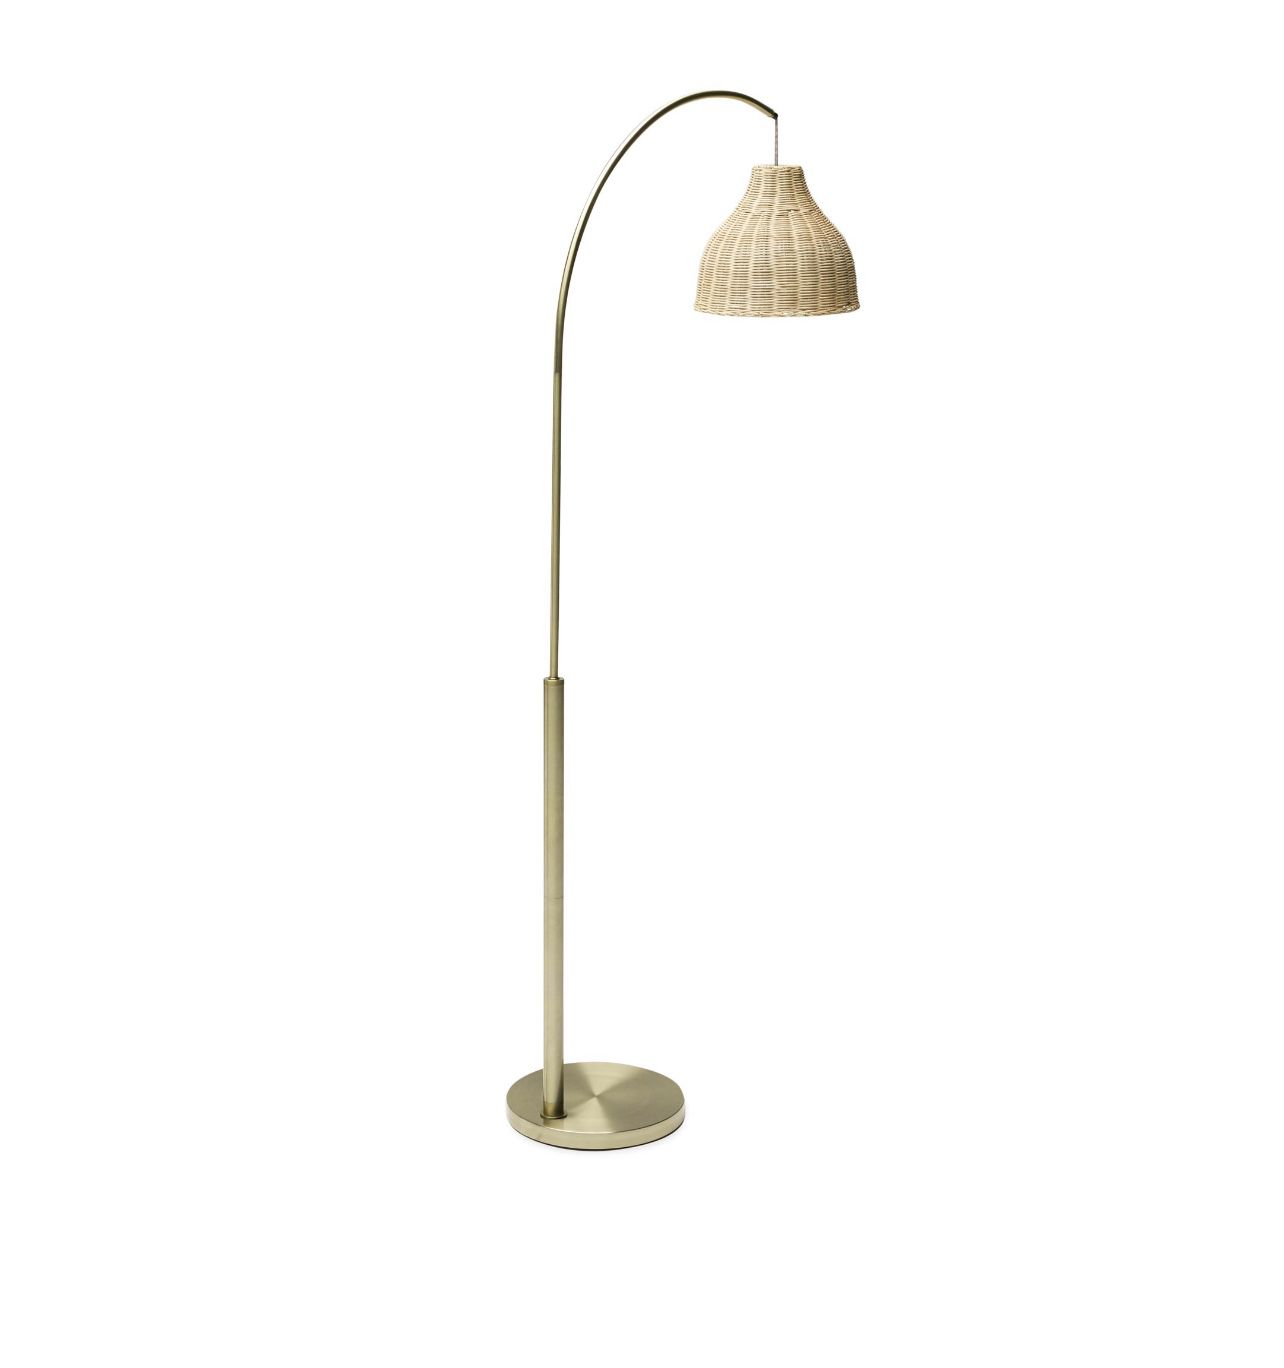 Antique BrassColor Arch Floor Lamp with Rattan Shade by Drew Barrymore Flower Home